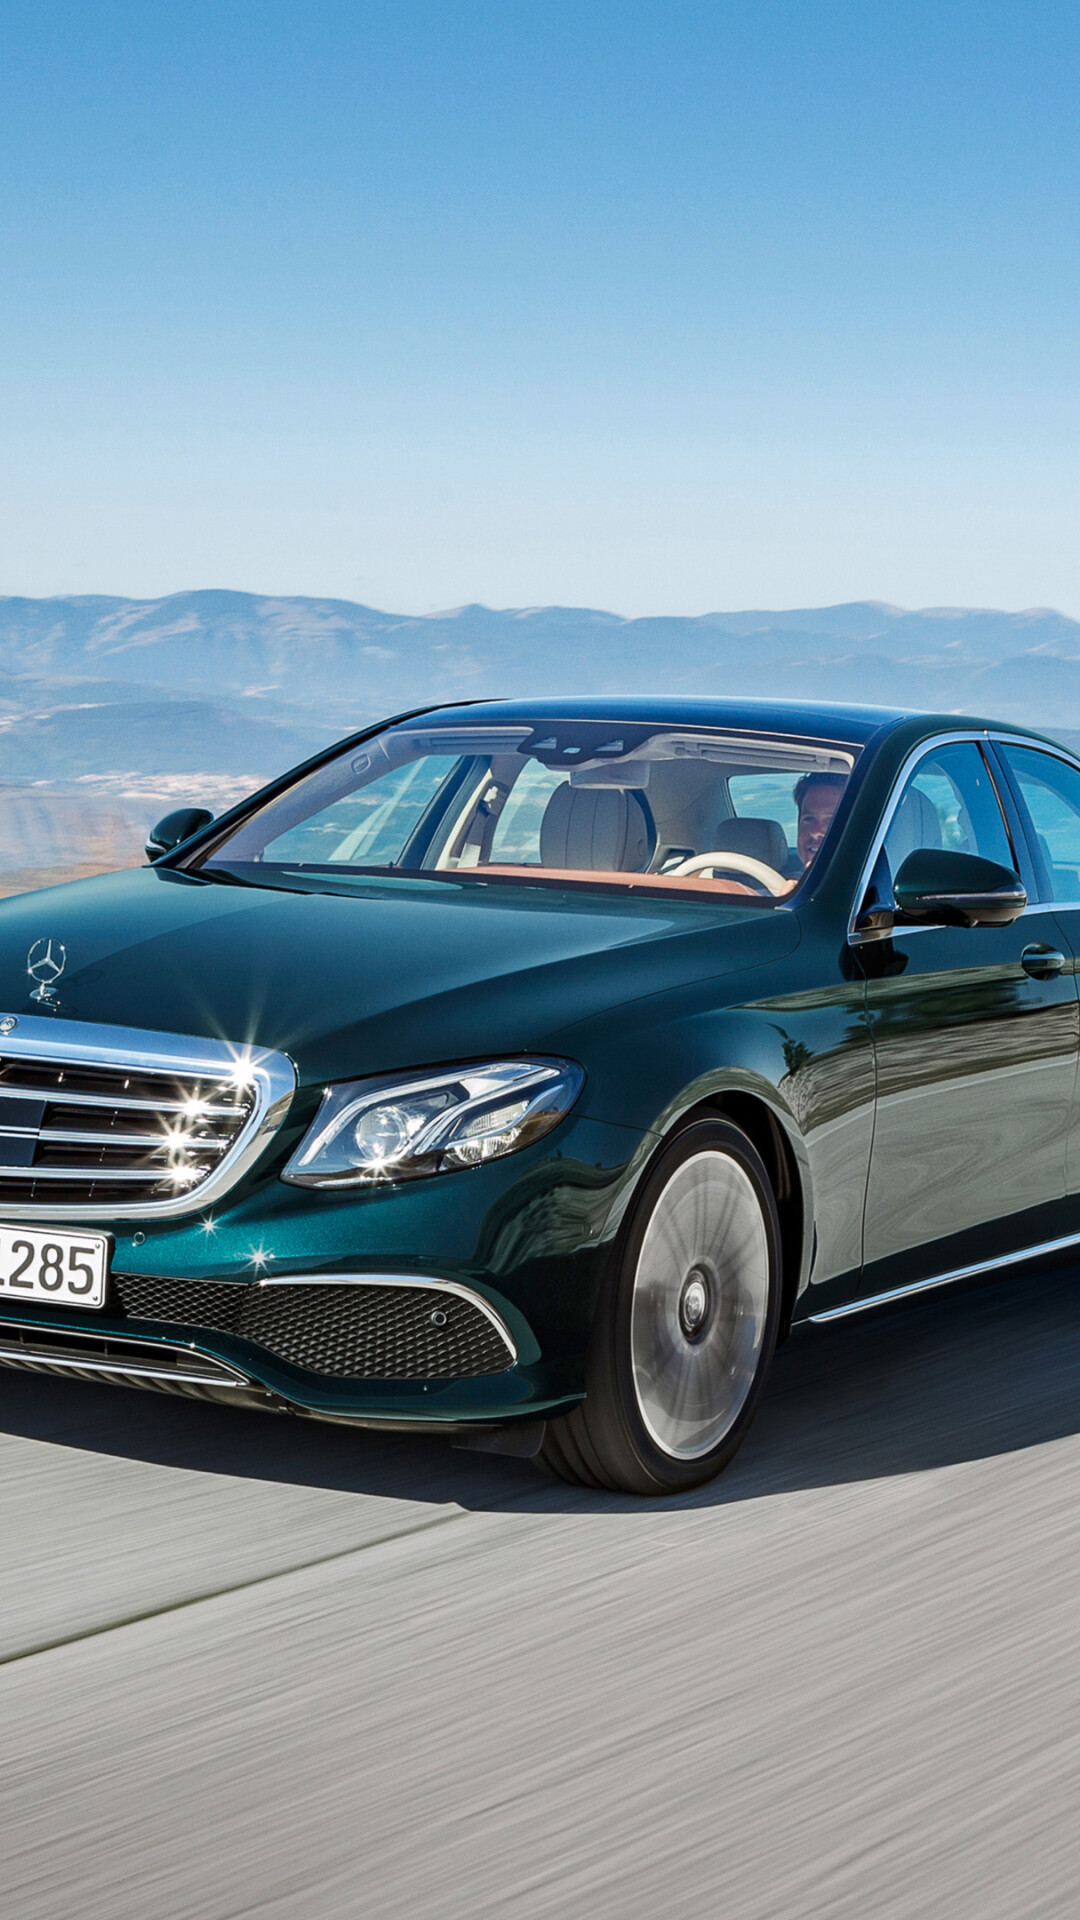 Mercedes-Benz: The brand's model 260D became the world’s first diesel fueled car. 1080x1920 Full HD Wallpaper.